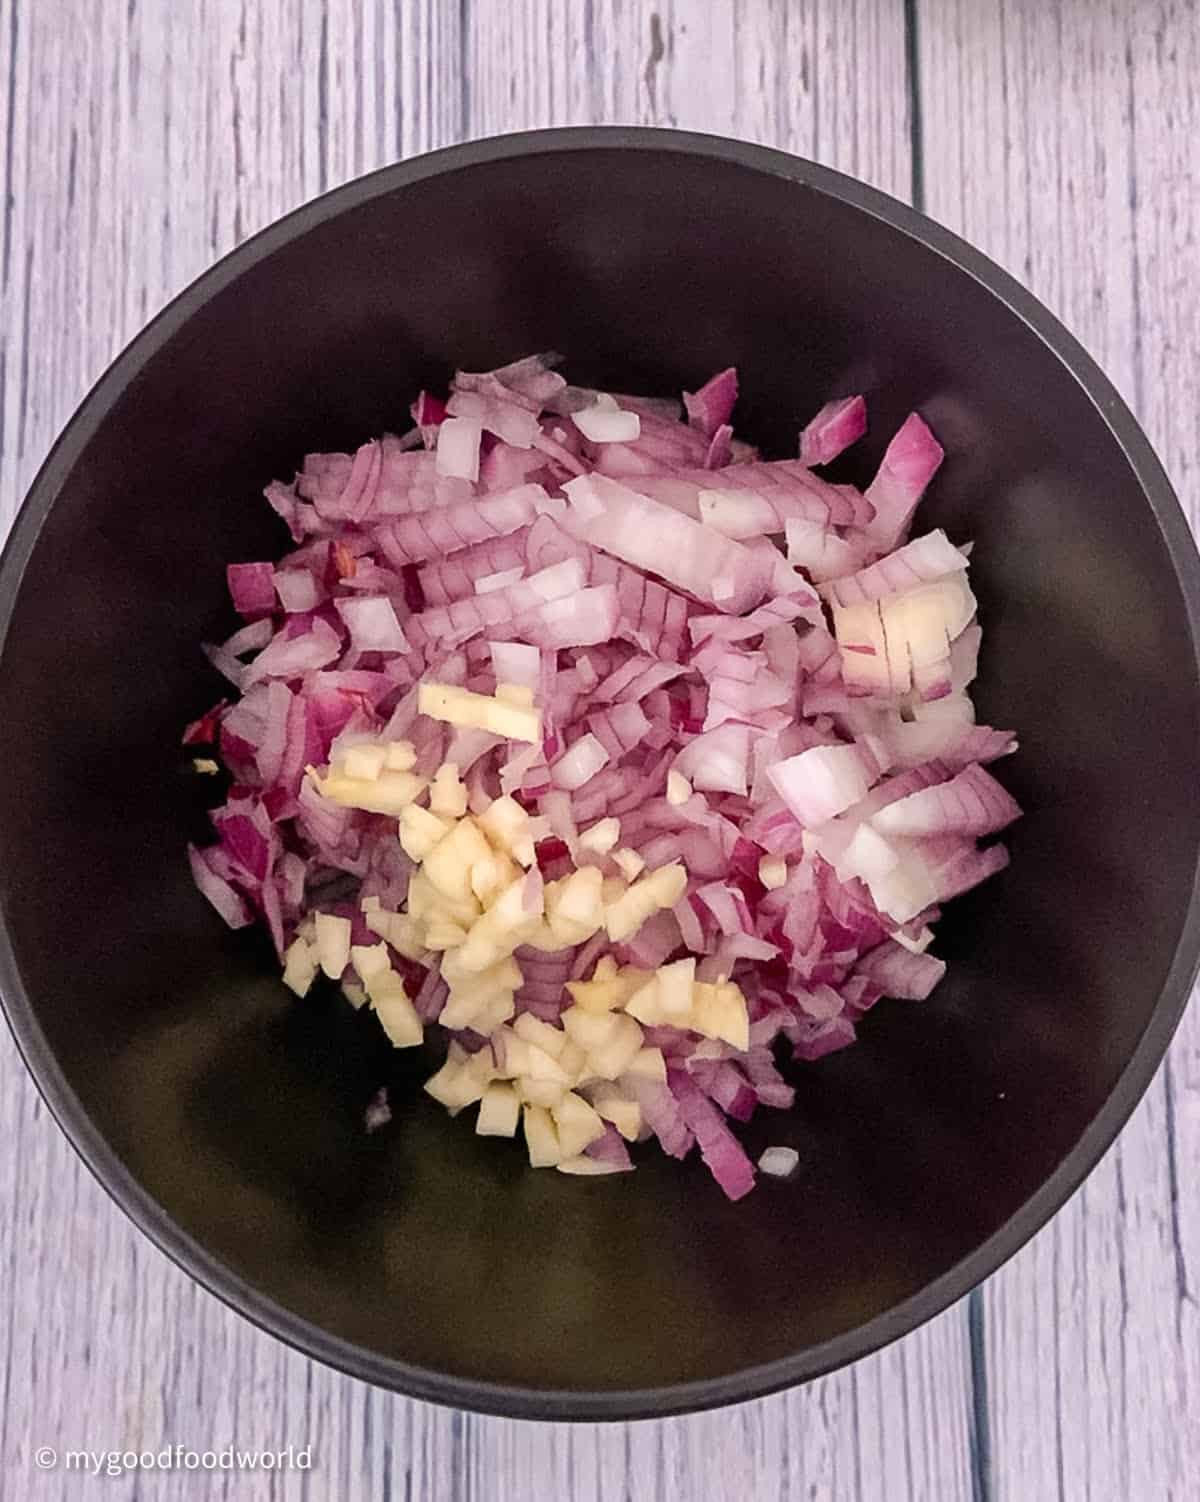 Finely chopped onion and garlic for paneer spinach curry are placed in a round black bowl. The bowl is placed on a light blue patterned background.